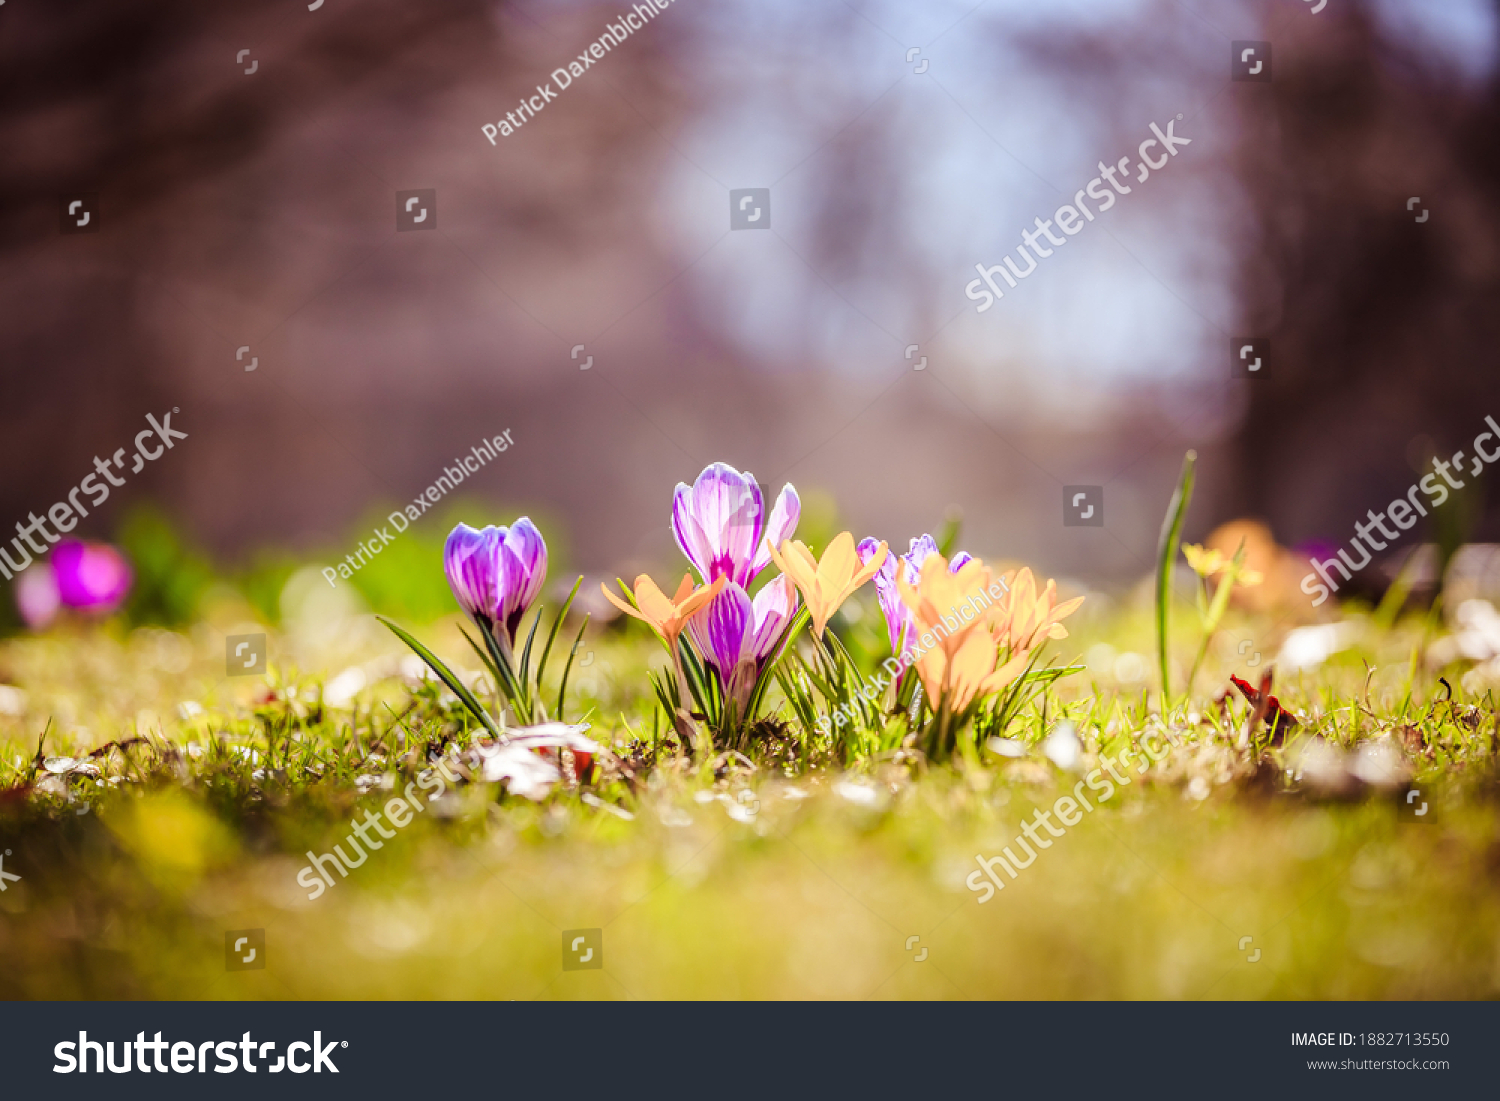 Spring flowers in the wild nature. Crocus in spring time. Copy space, ideal for postcard. #1882713550